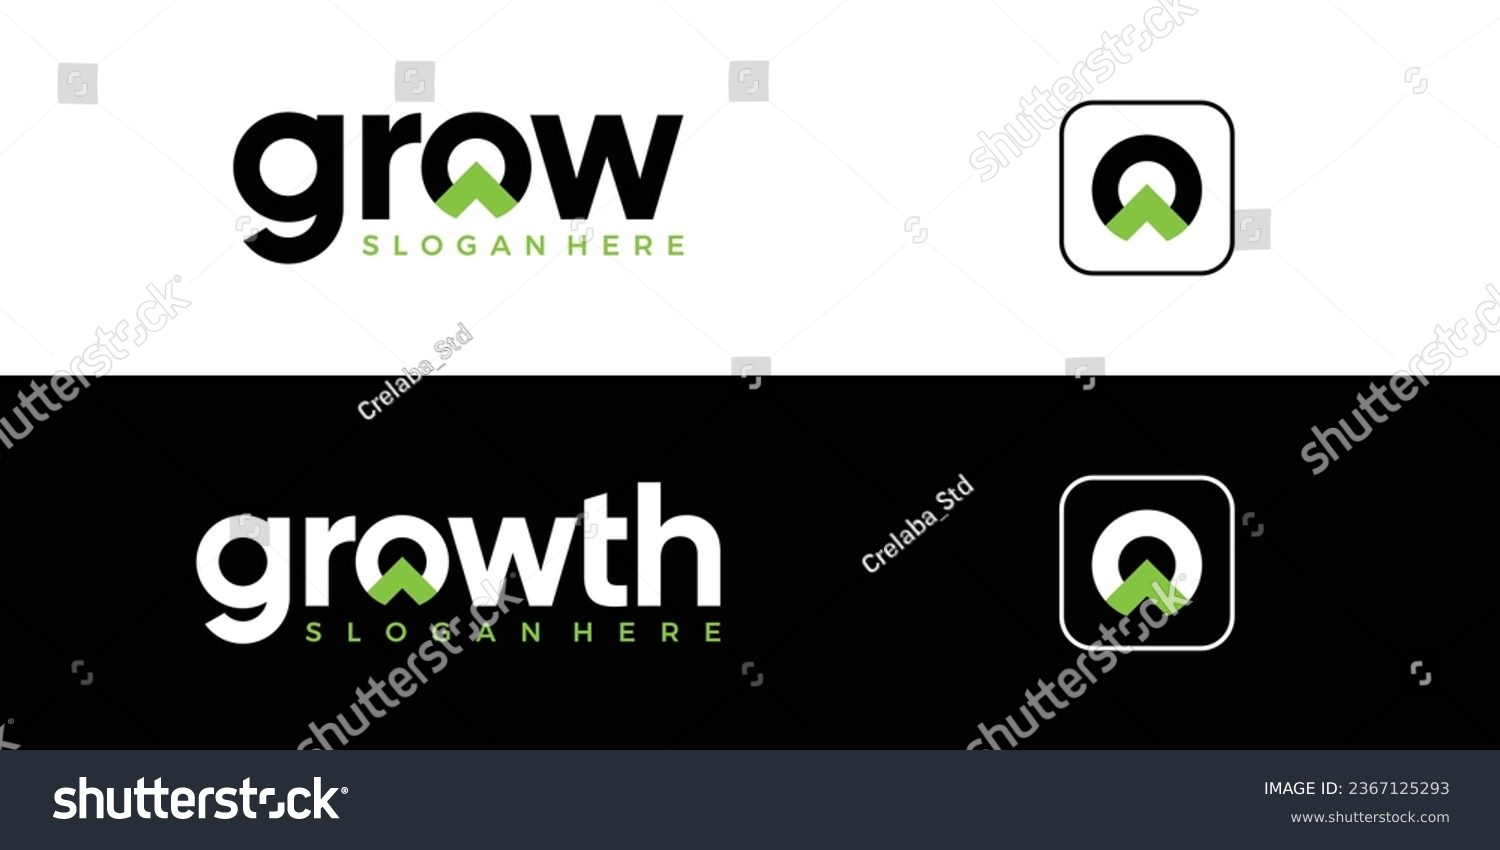 SVG of Modern growth logo design wordmark. Abstract arrow shapes logo design in letter O graphic vector illustration. Symbol, icon, creative. svg